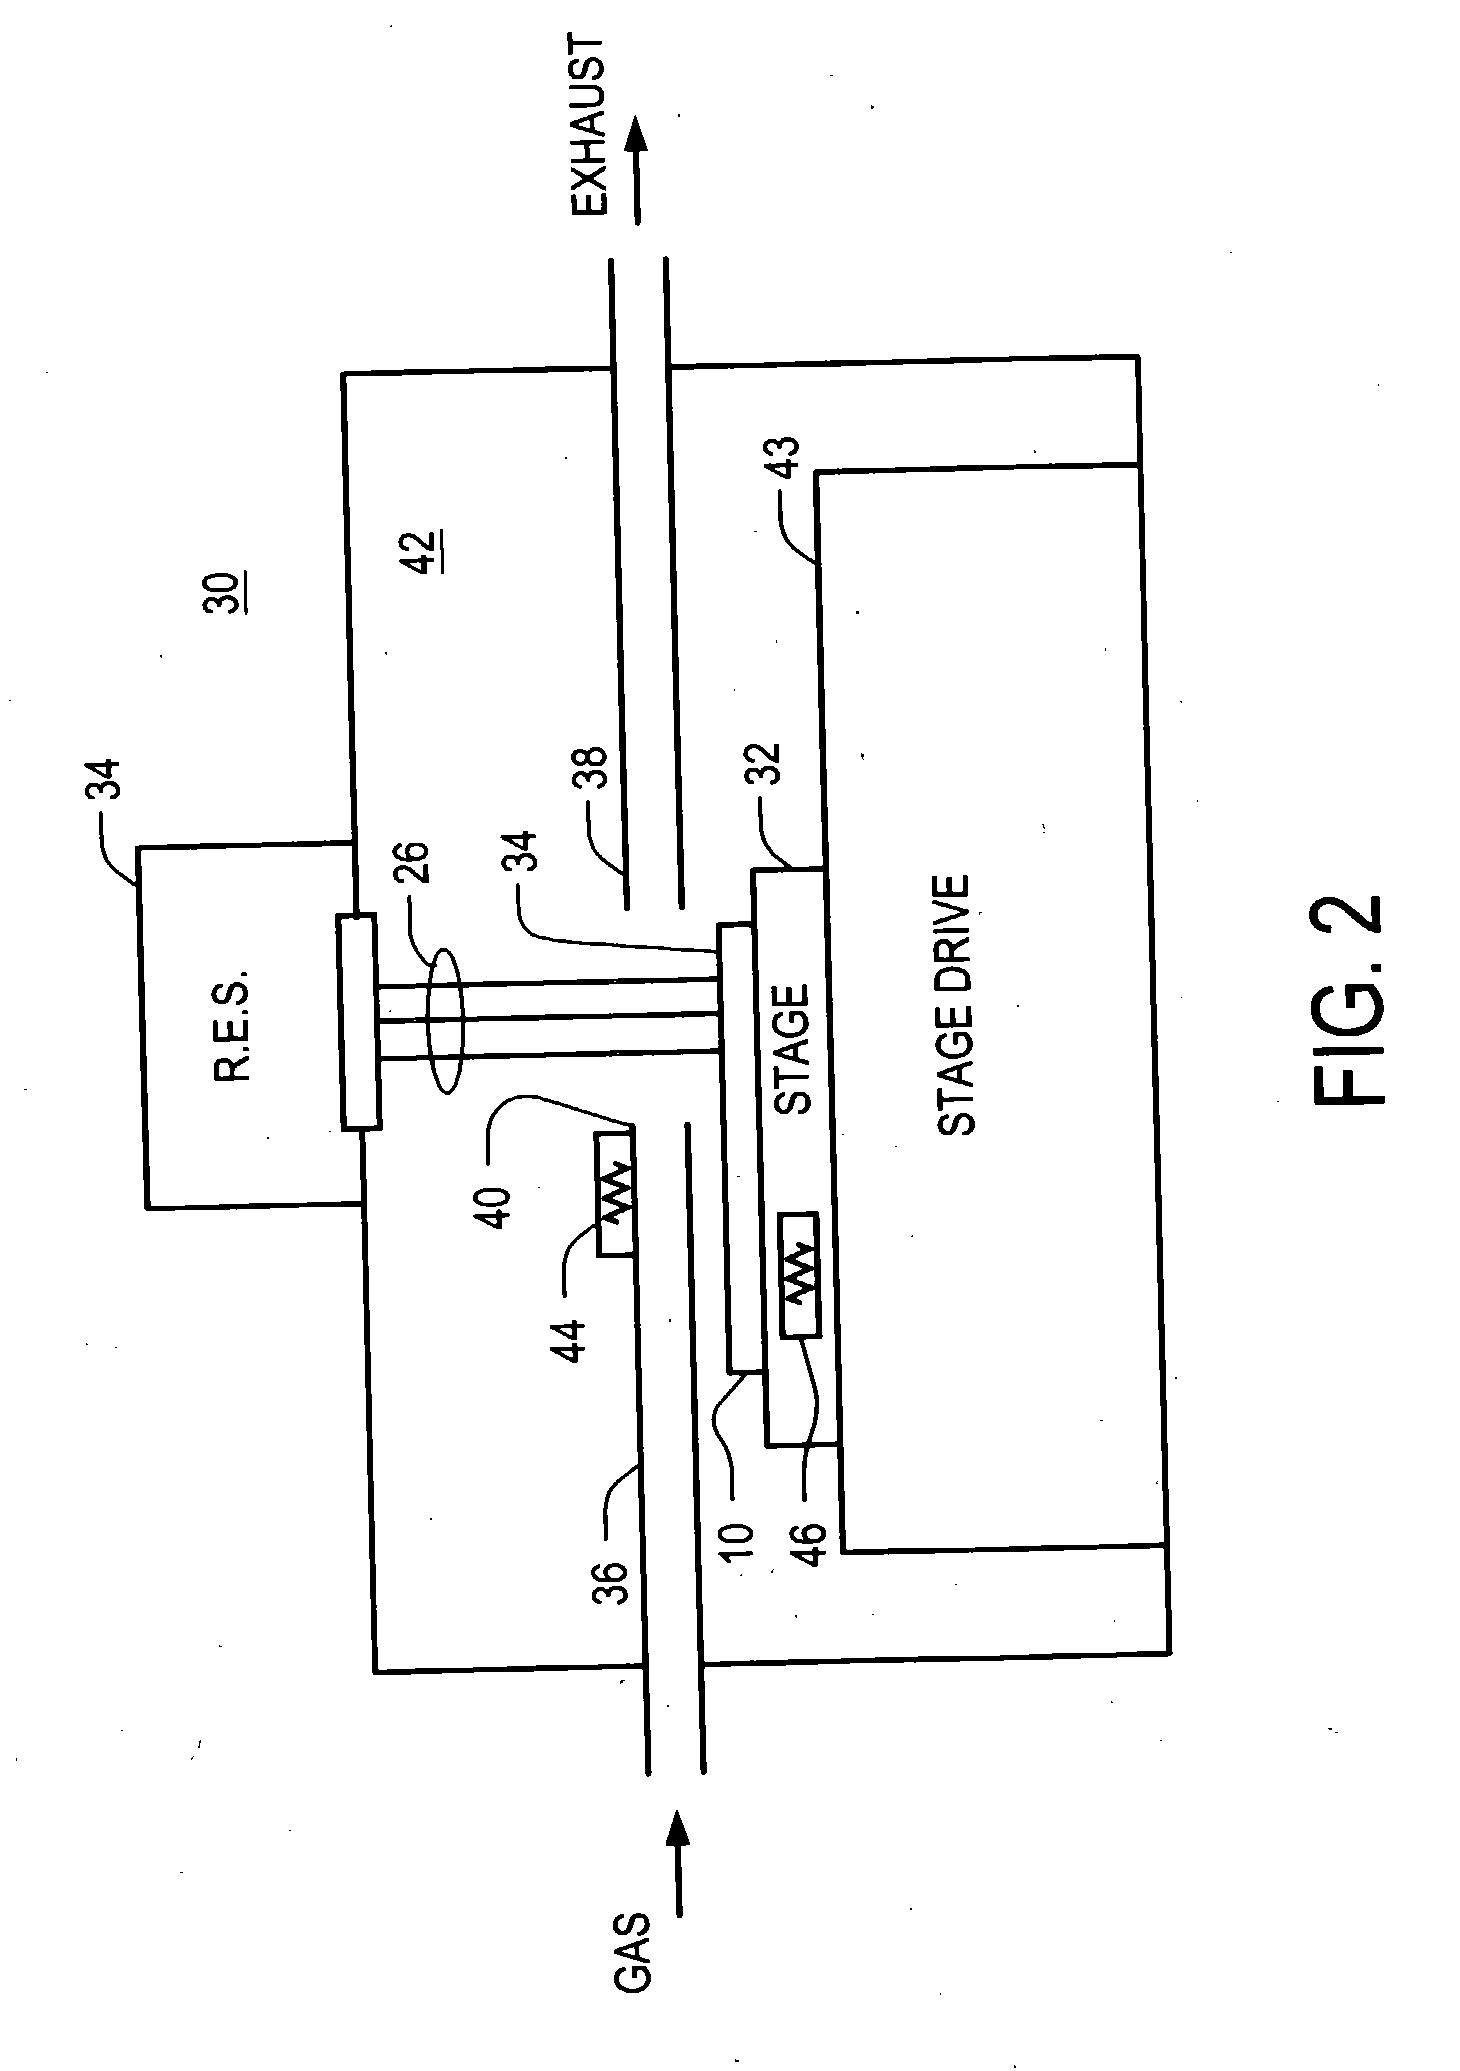 Apparatus and method for fabrication of nanostructures using decoupled heating of constituents